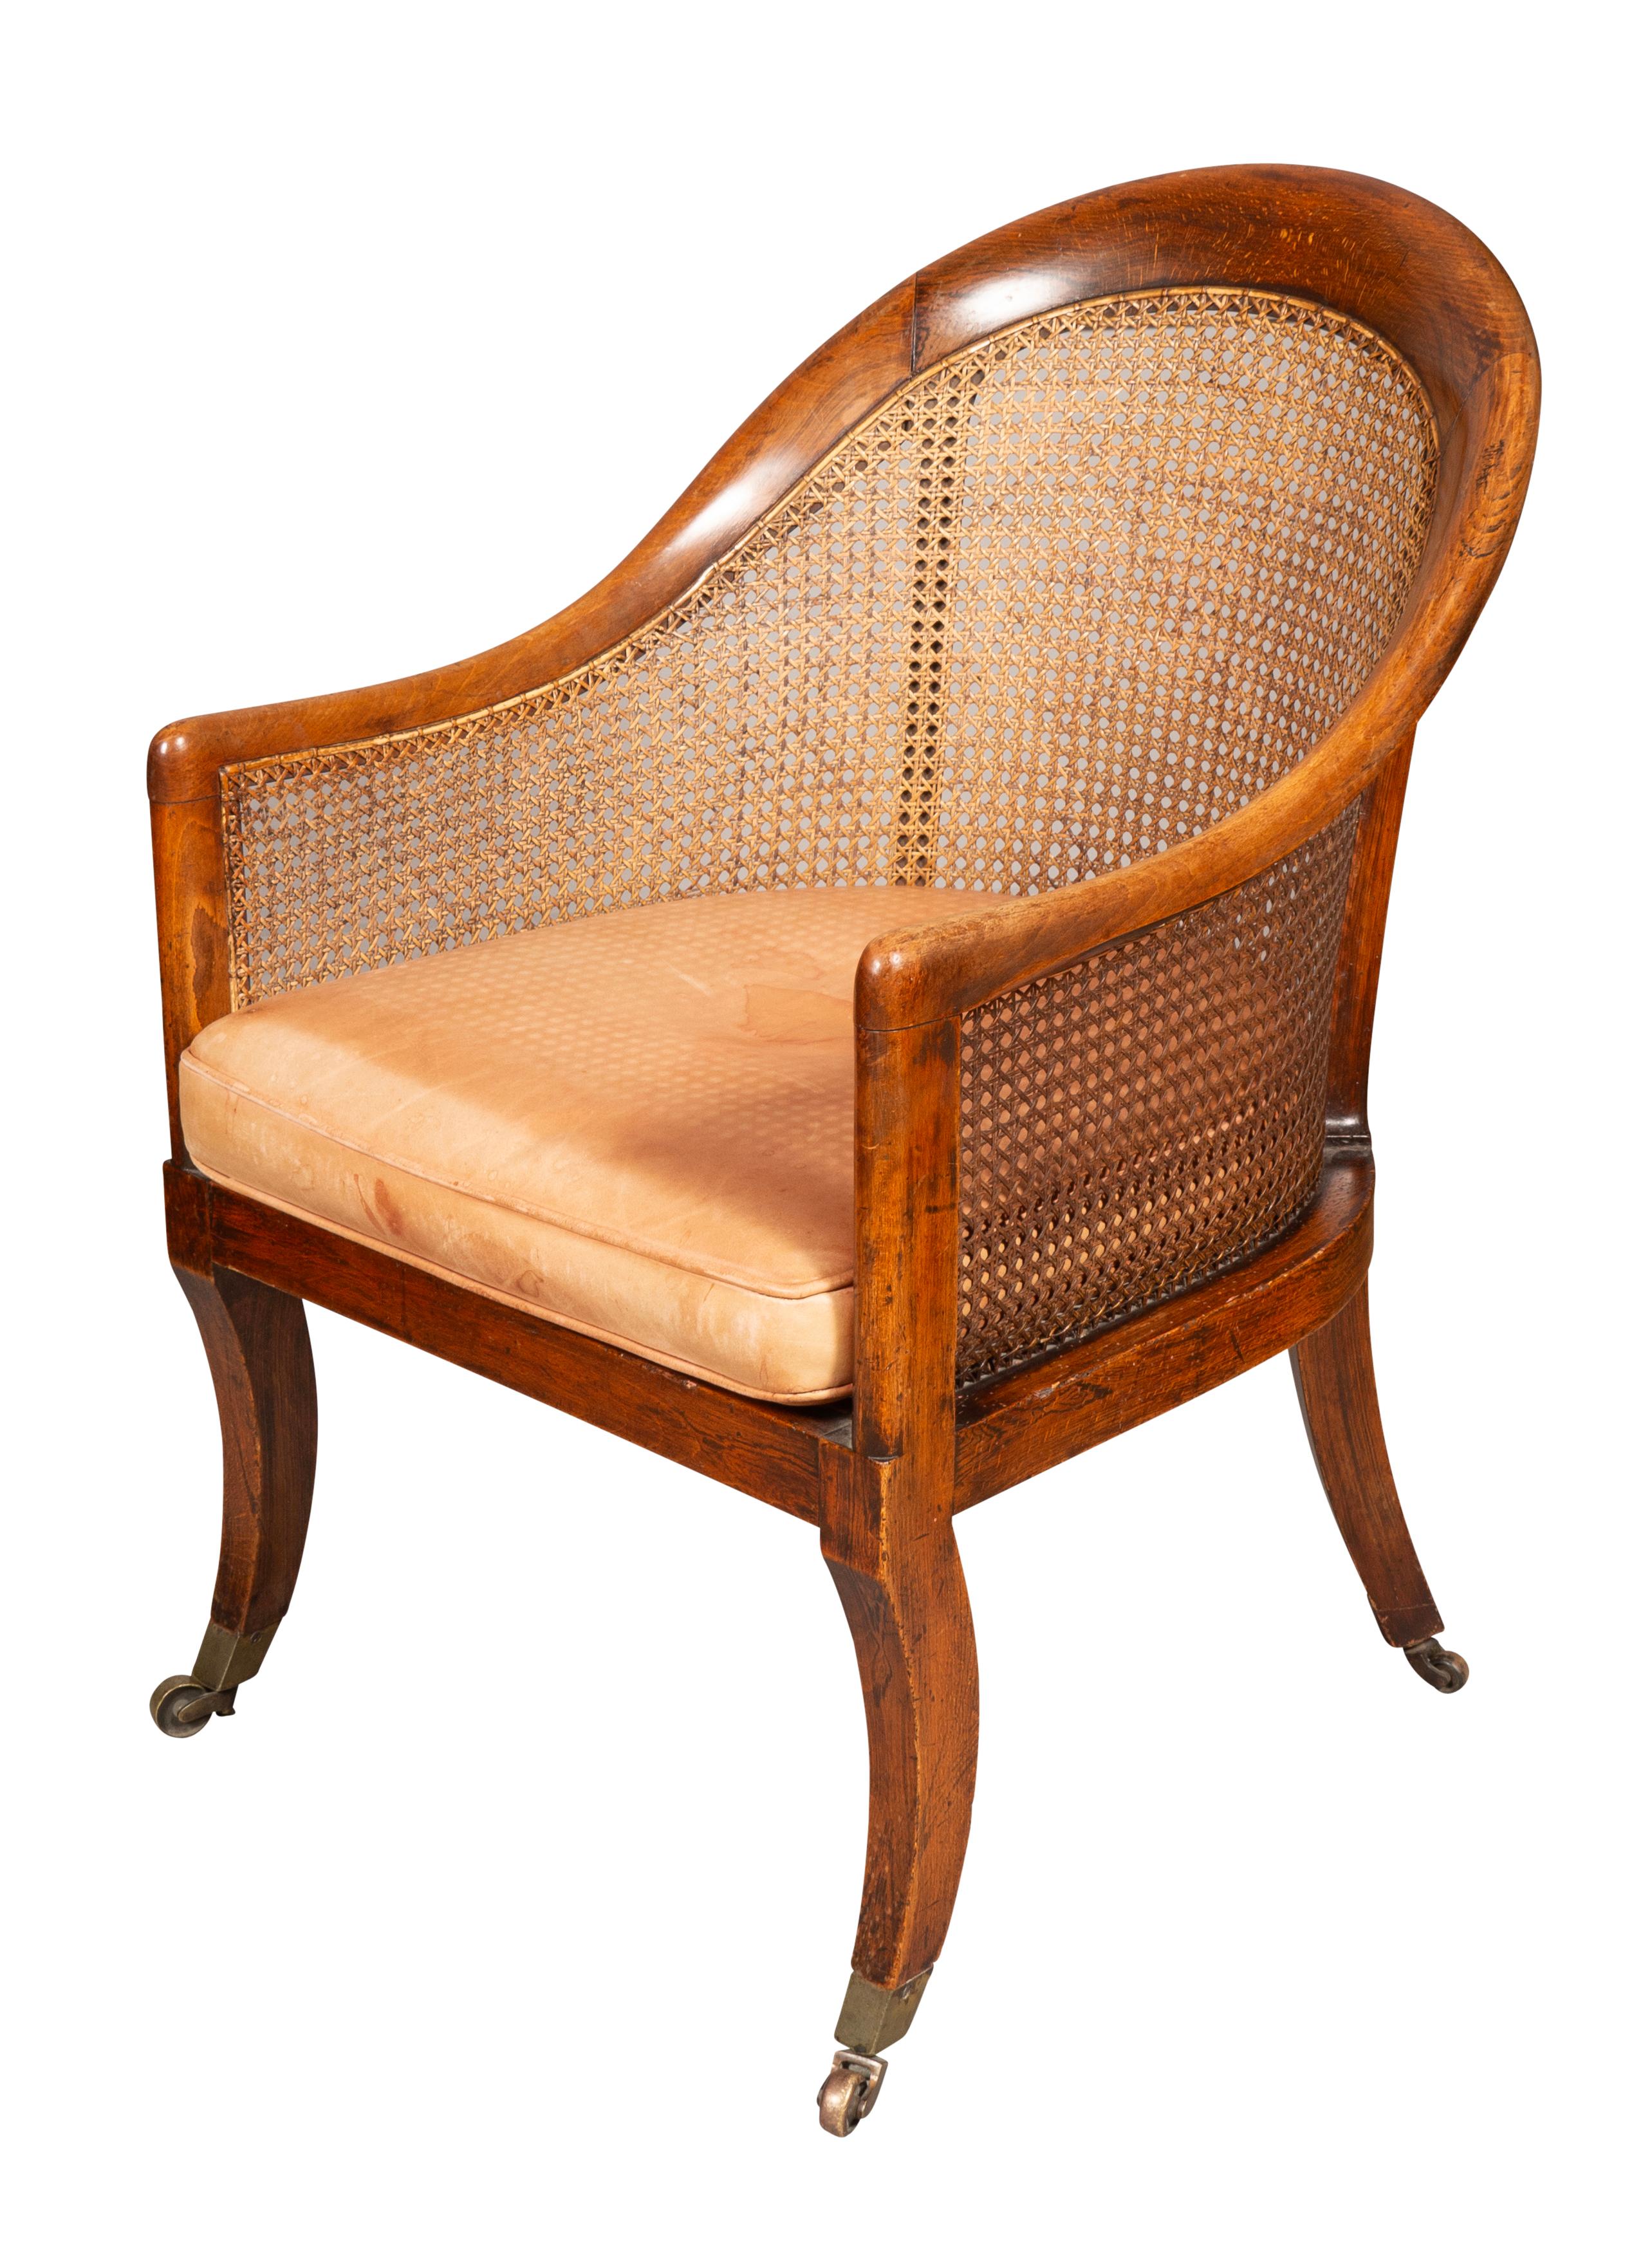 Hand-Painted Regency Faux Rosewood Caned Bergere For Sale